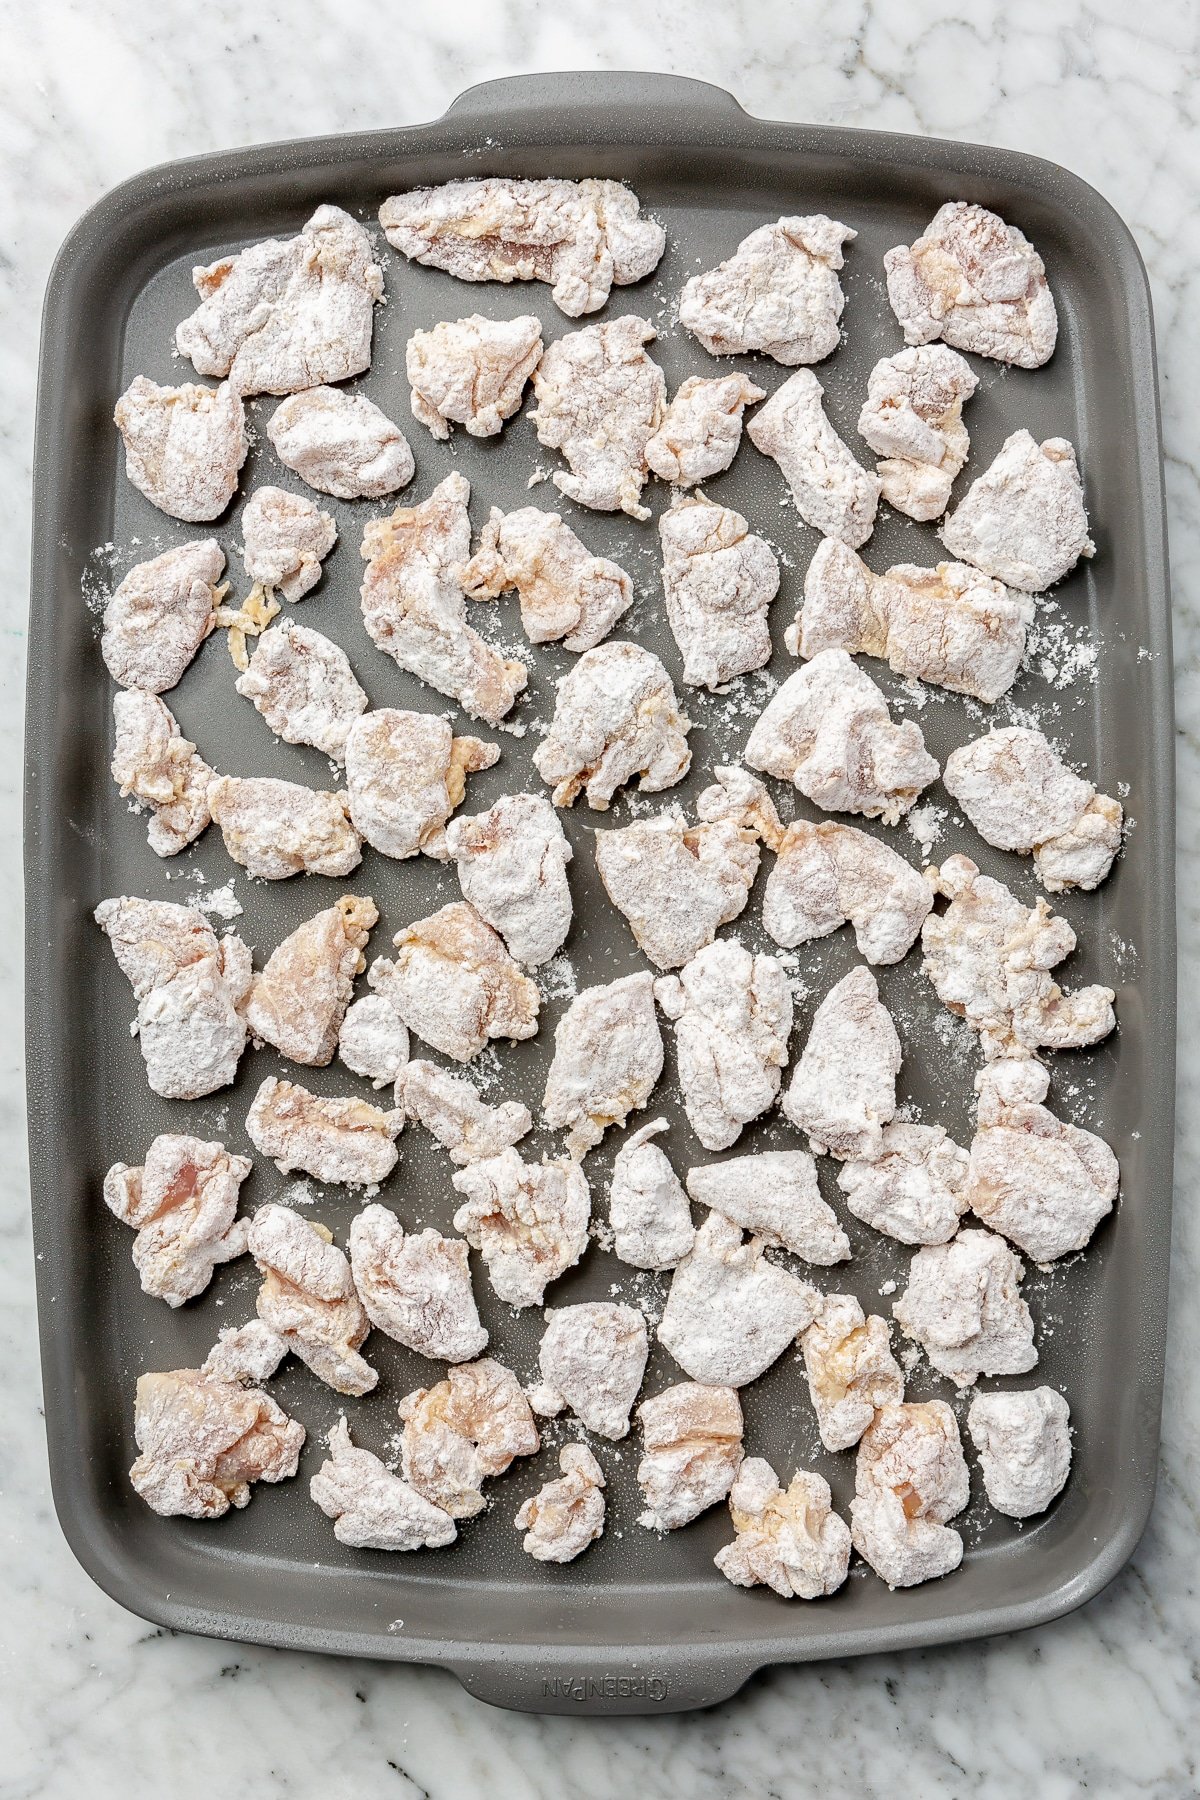 Floured chicken cubes lay, evenly distributed, on a nonstick cooking pan.